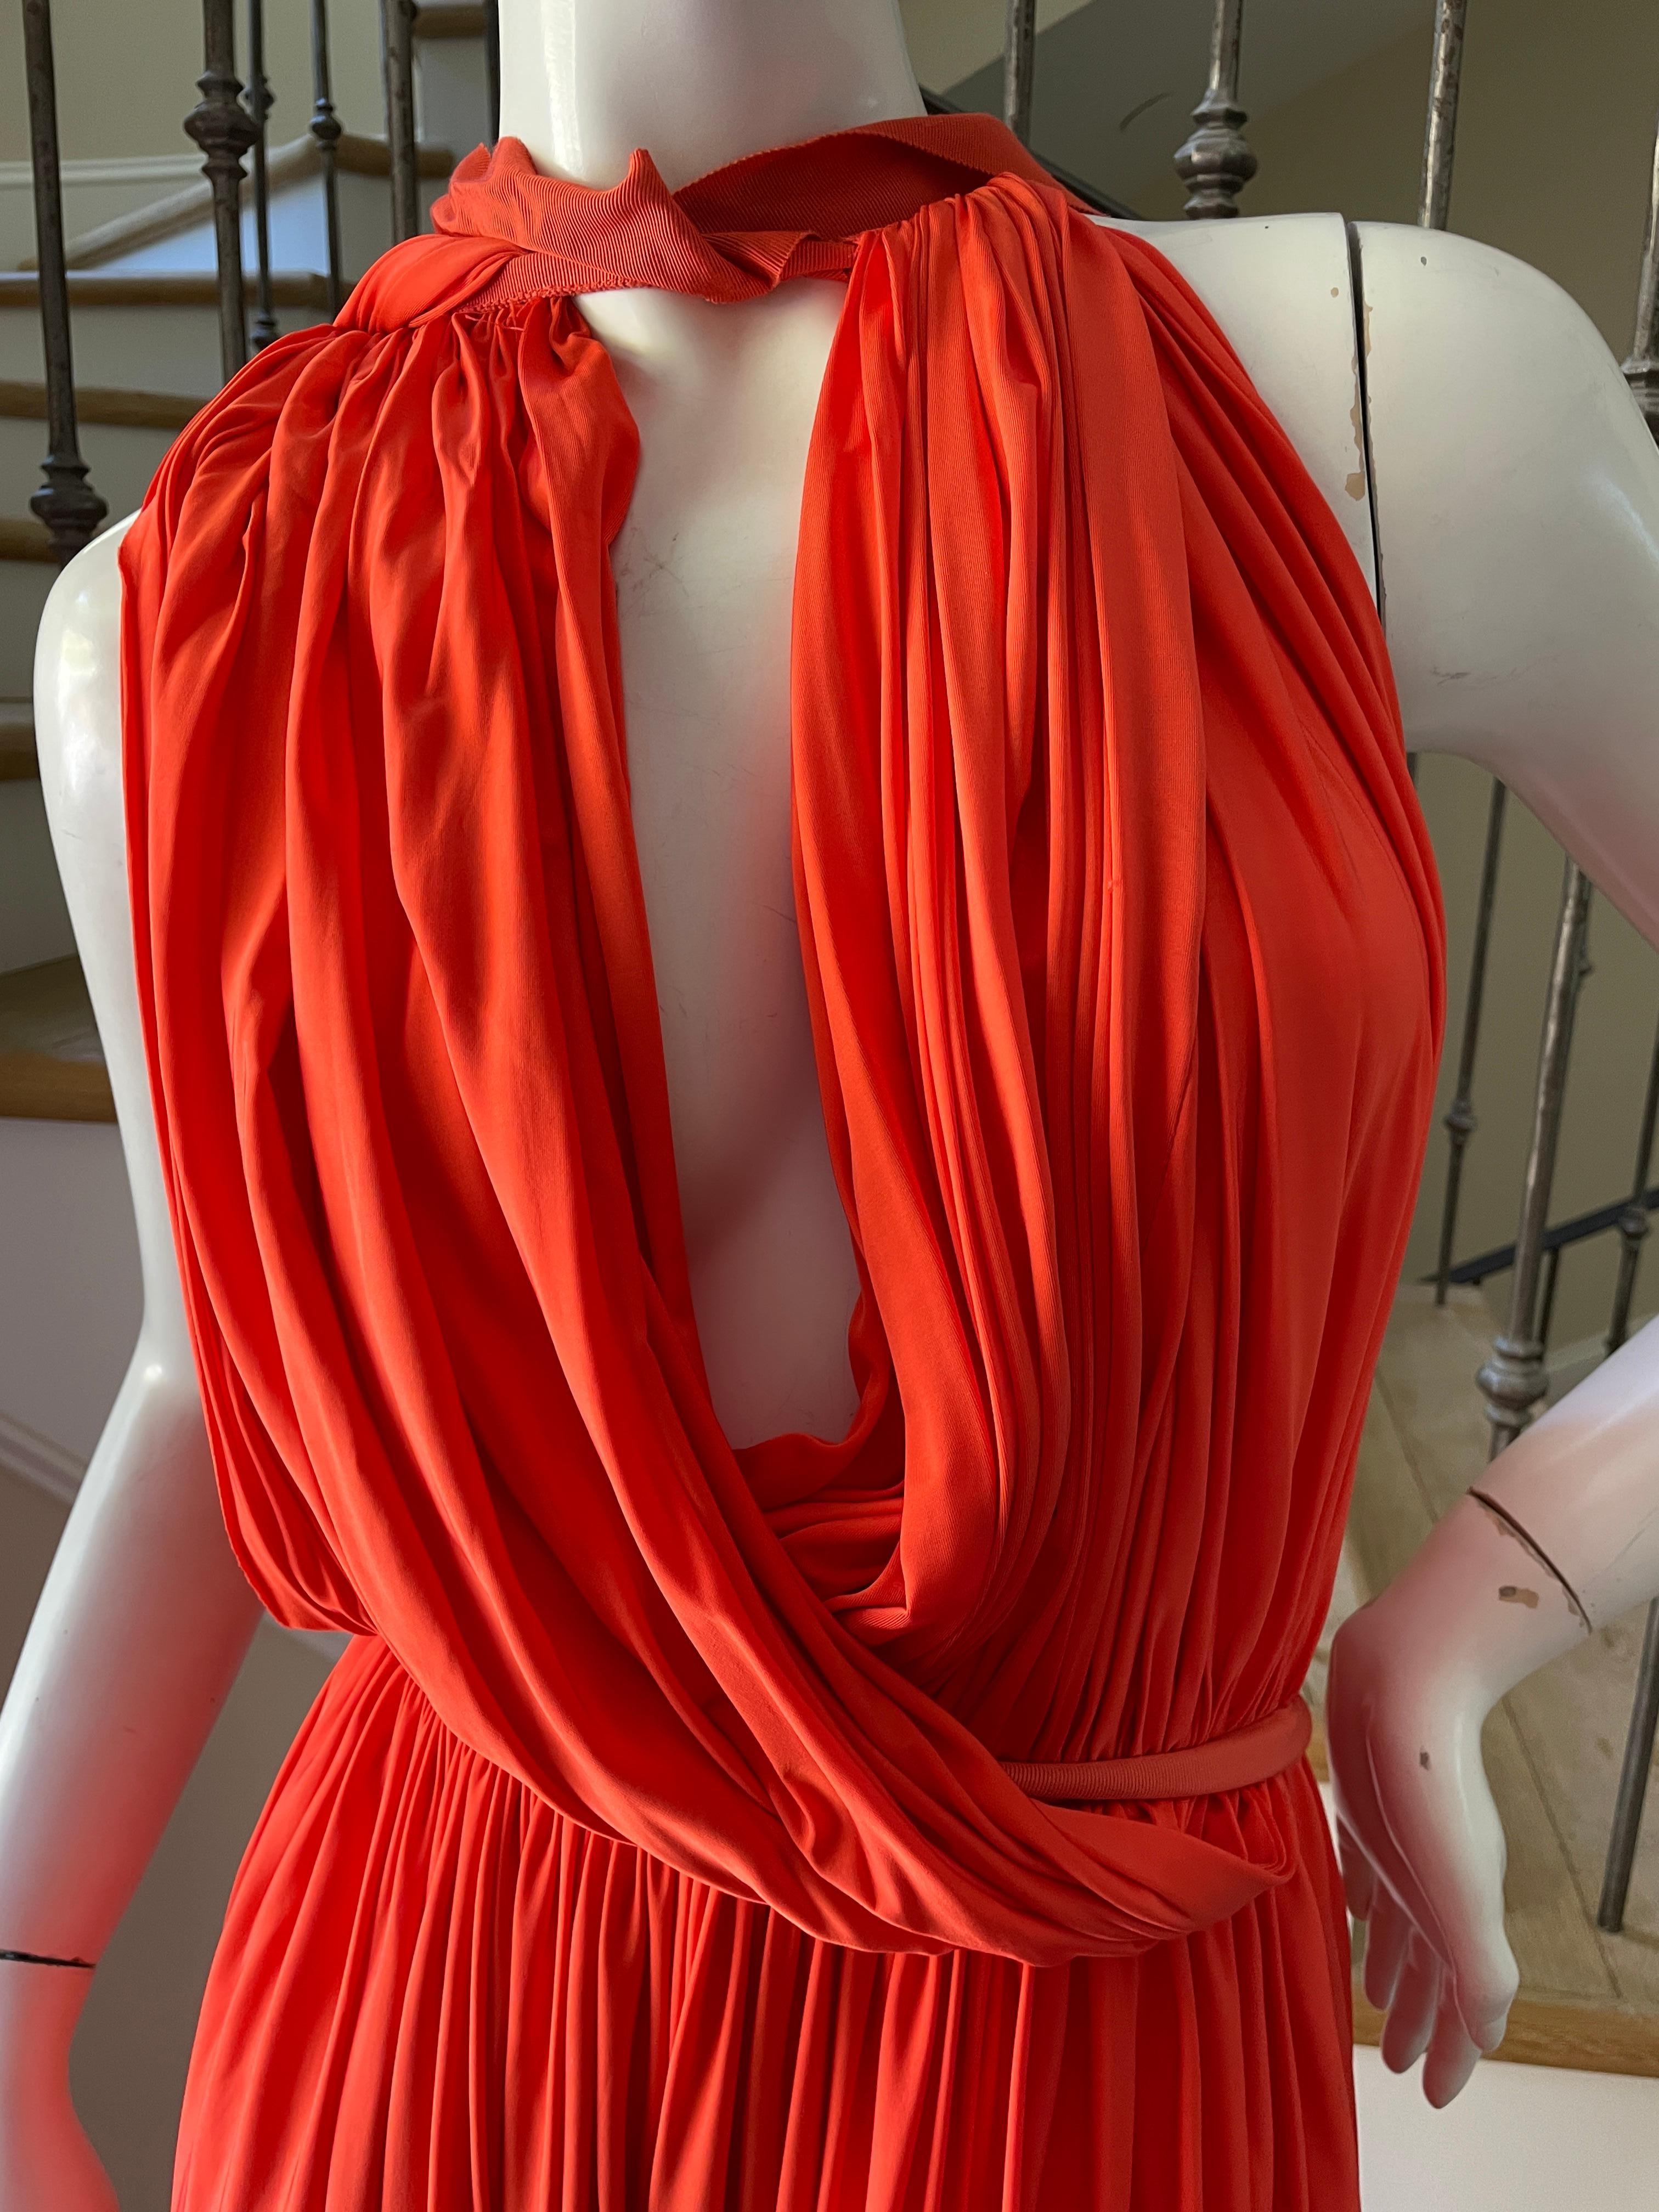 Lanvin by Alber Elbaz Resort 2014 Orange Goddess Gown.
Low cut keyhole bust drapes beautifully.
 So beautiful, much prettier in person. 
 Size 42
 Bust 36